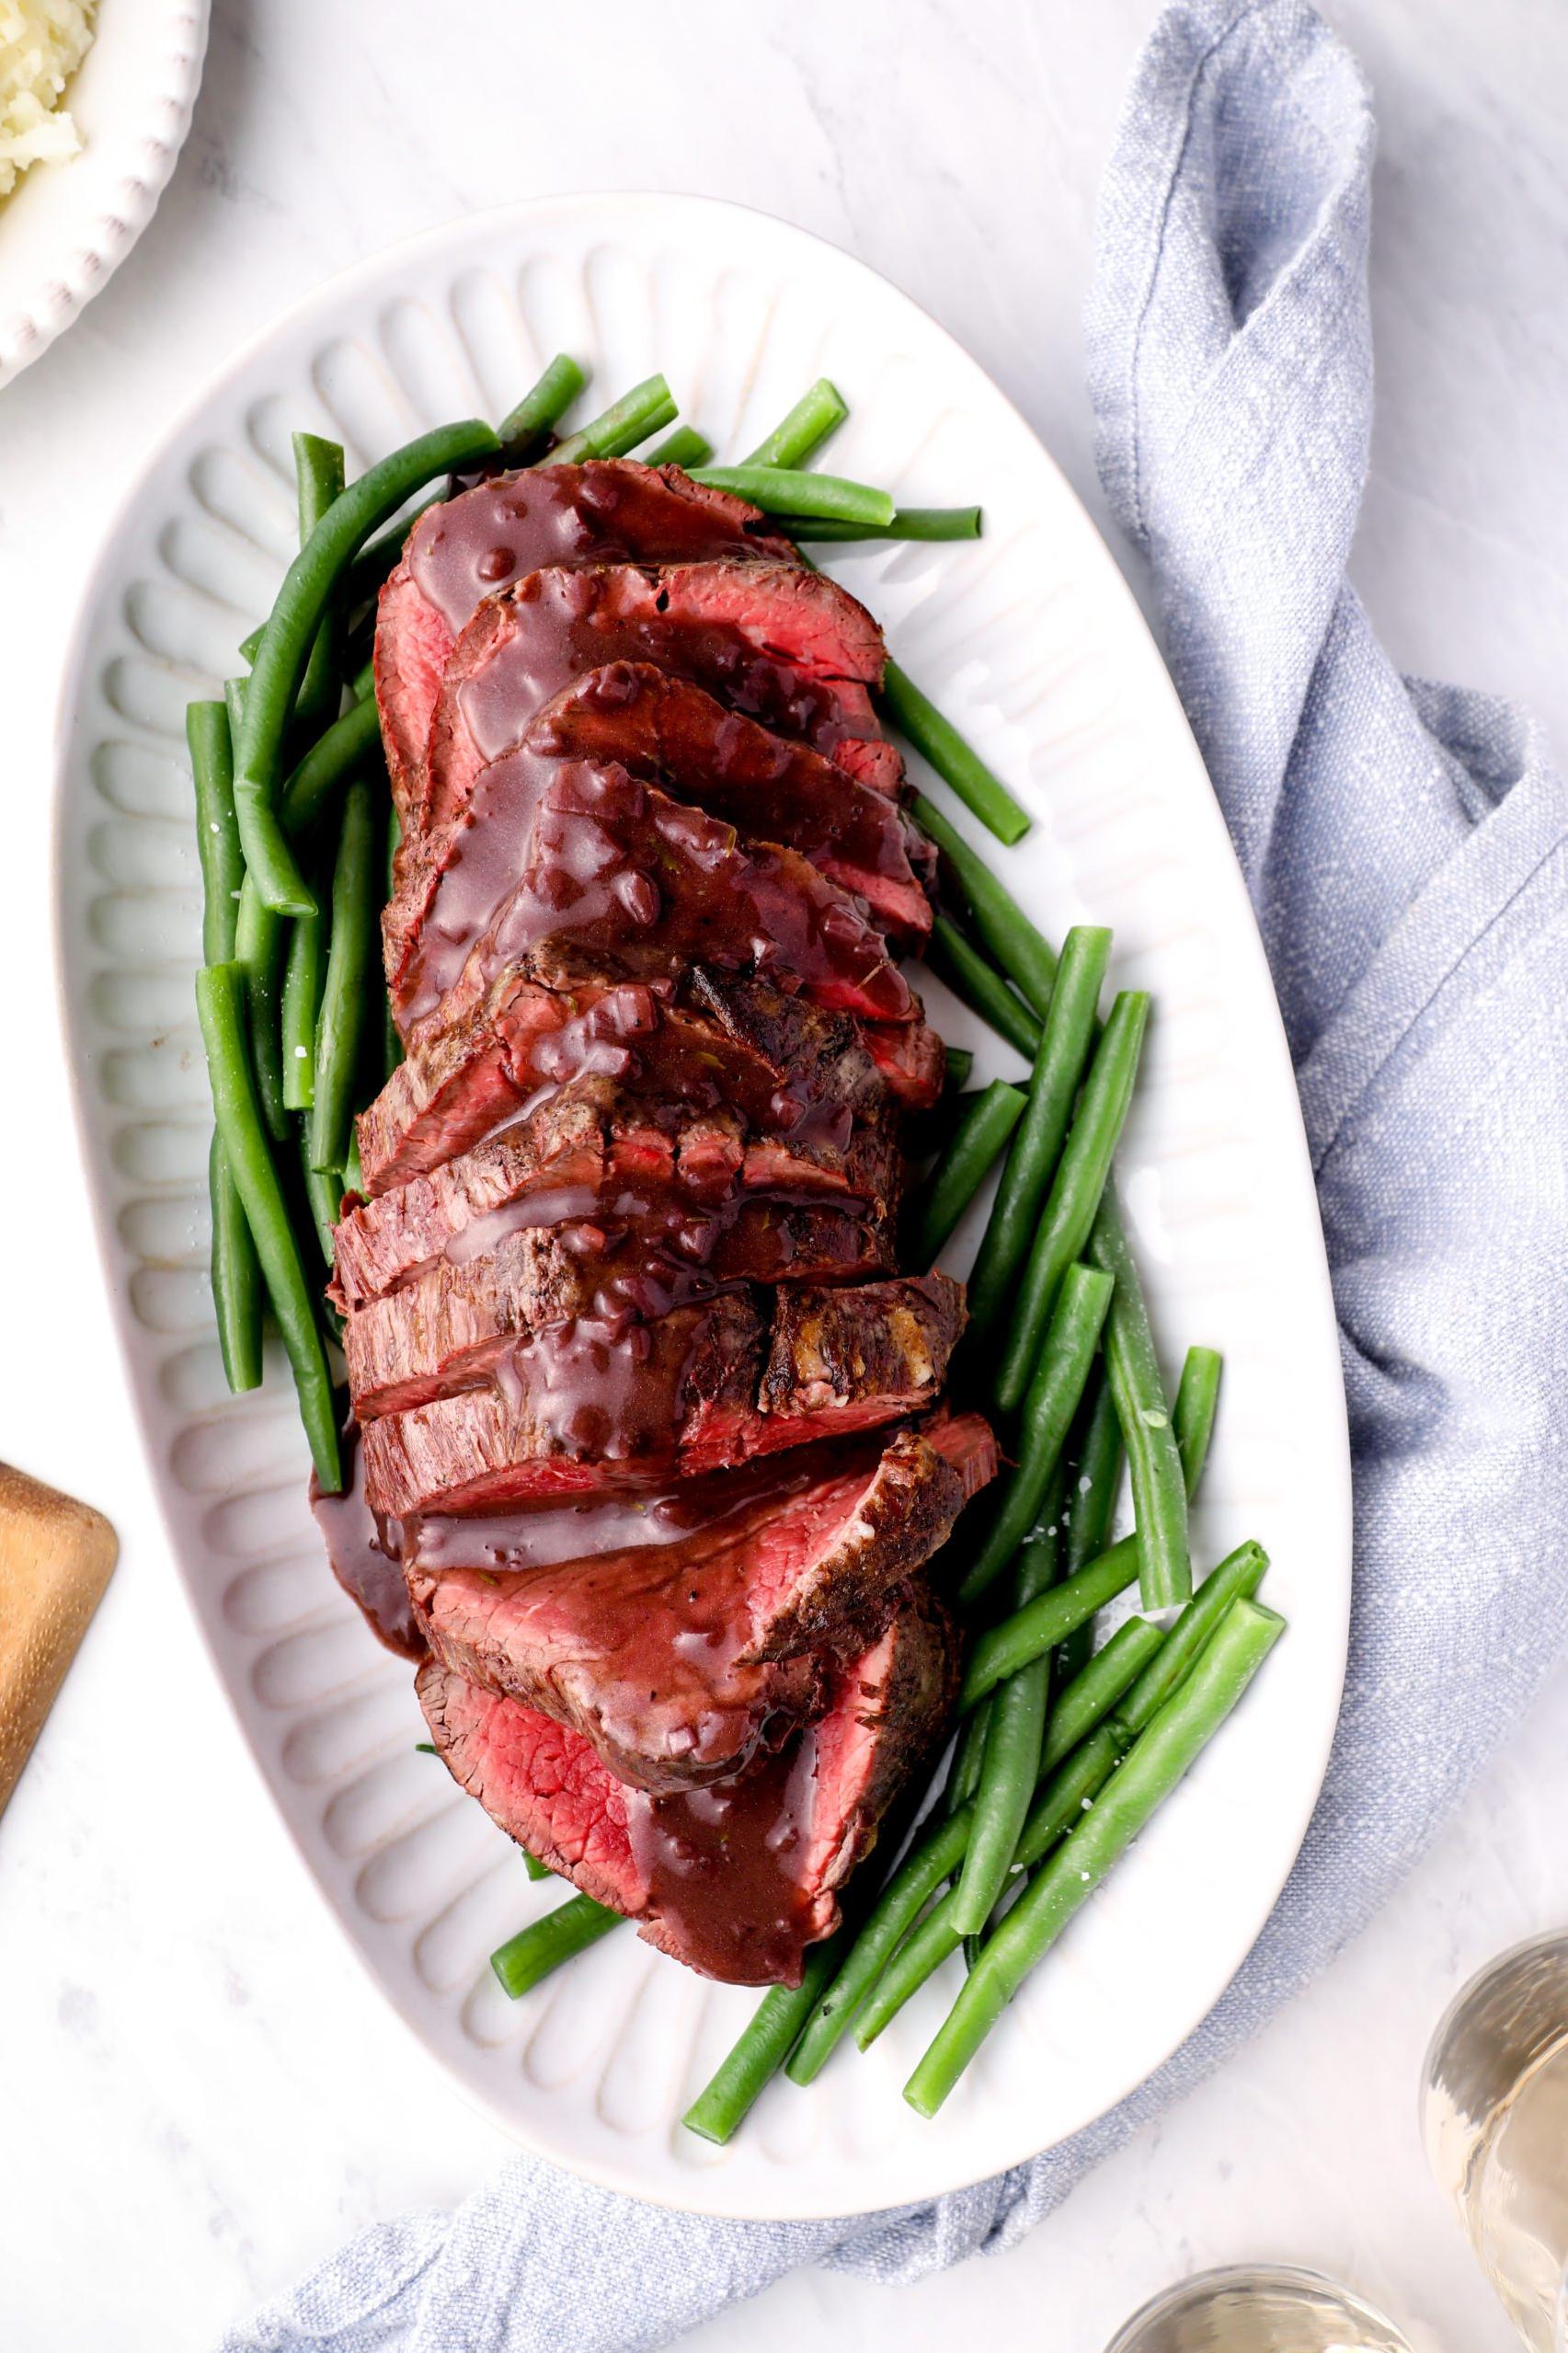  Adding a splash of Cabernet to the roast adds a touch of sophistication and depth of flavor.